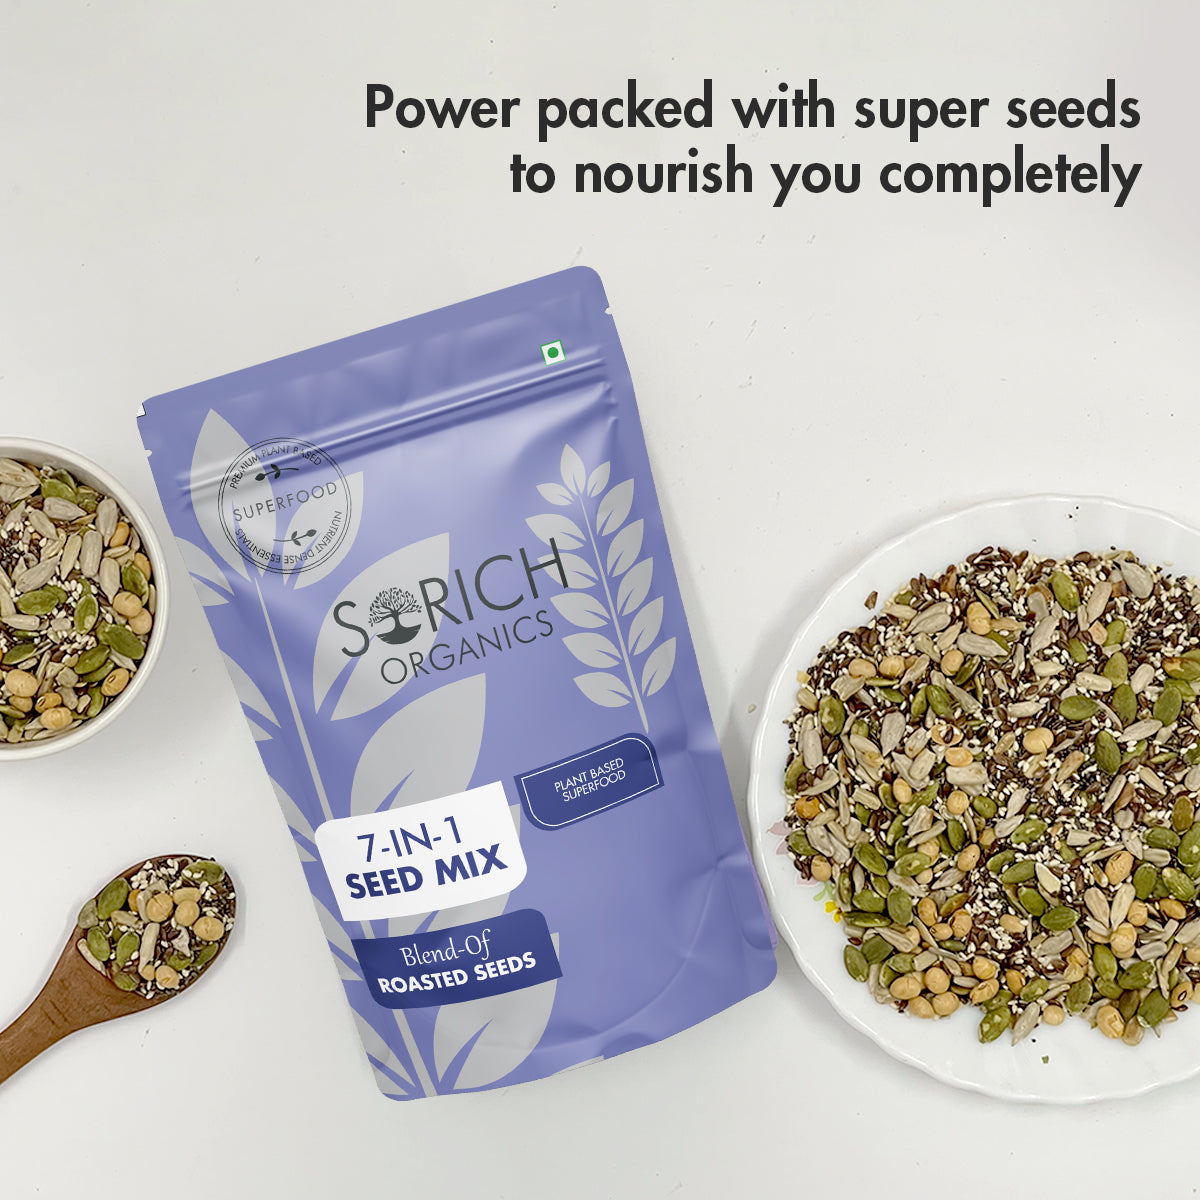 7 in 1 Seeds Mix - Sorich